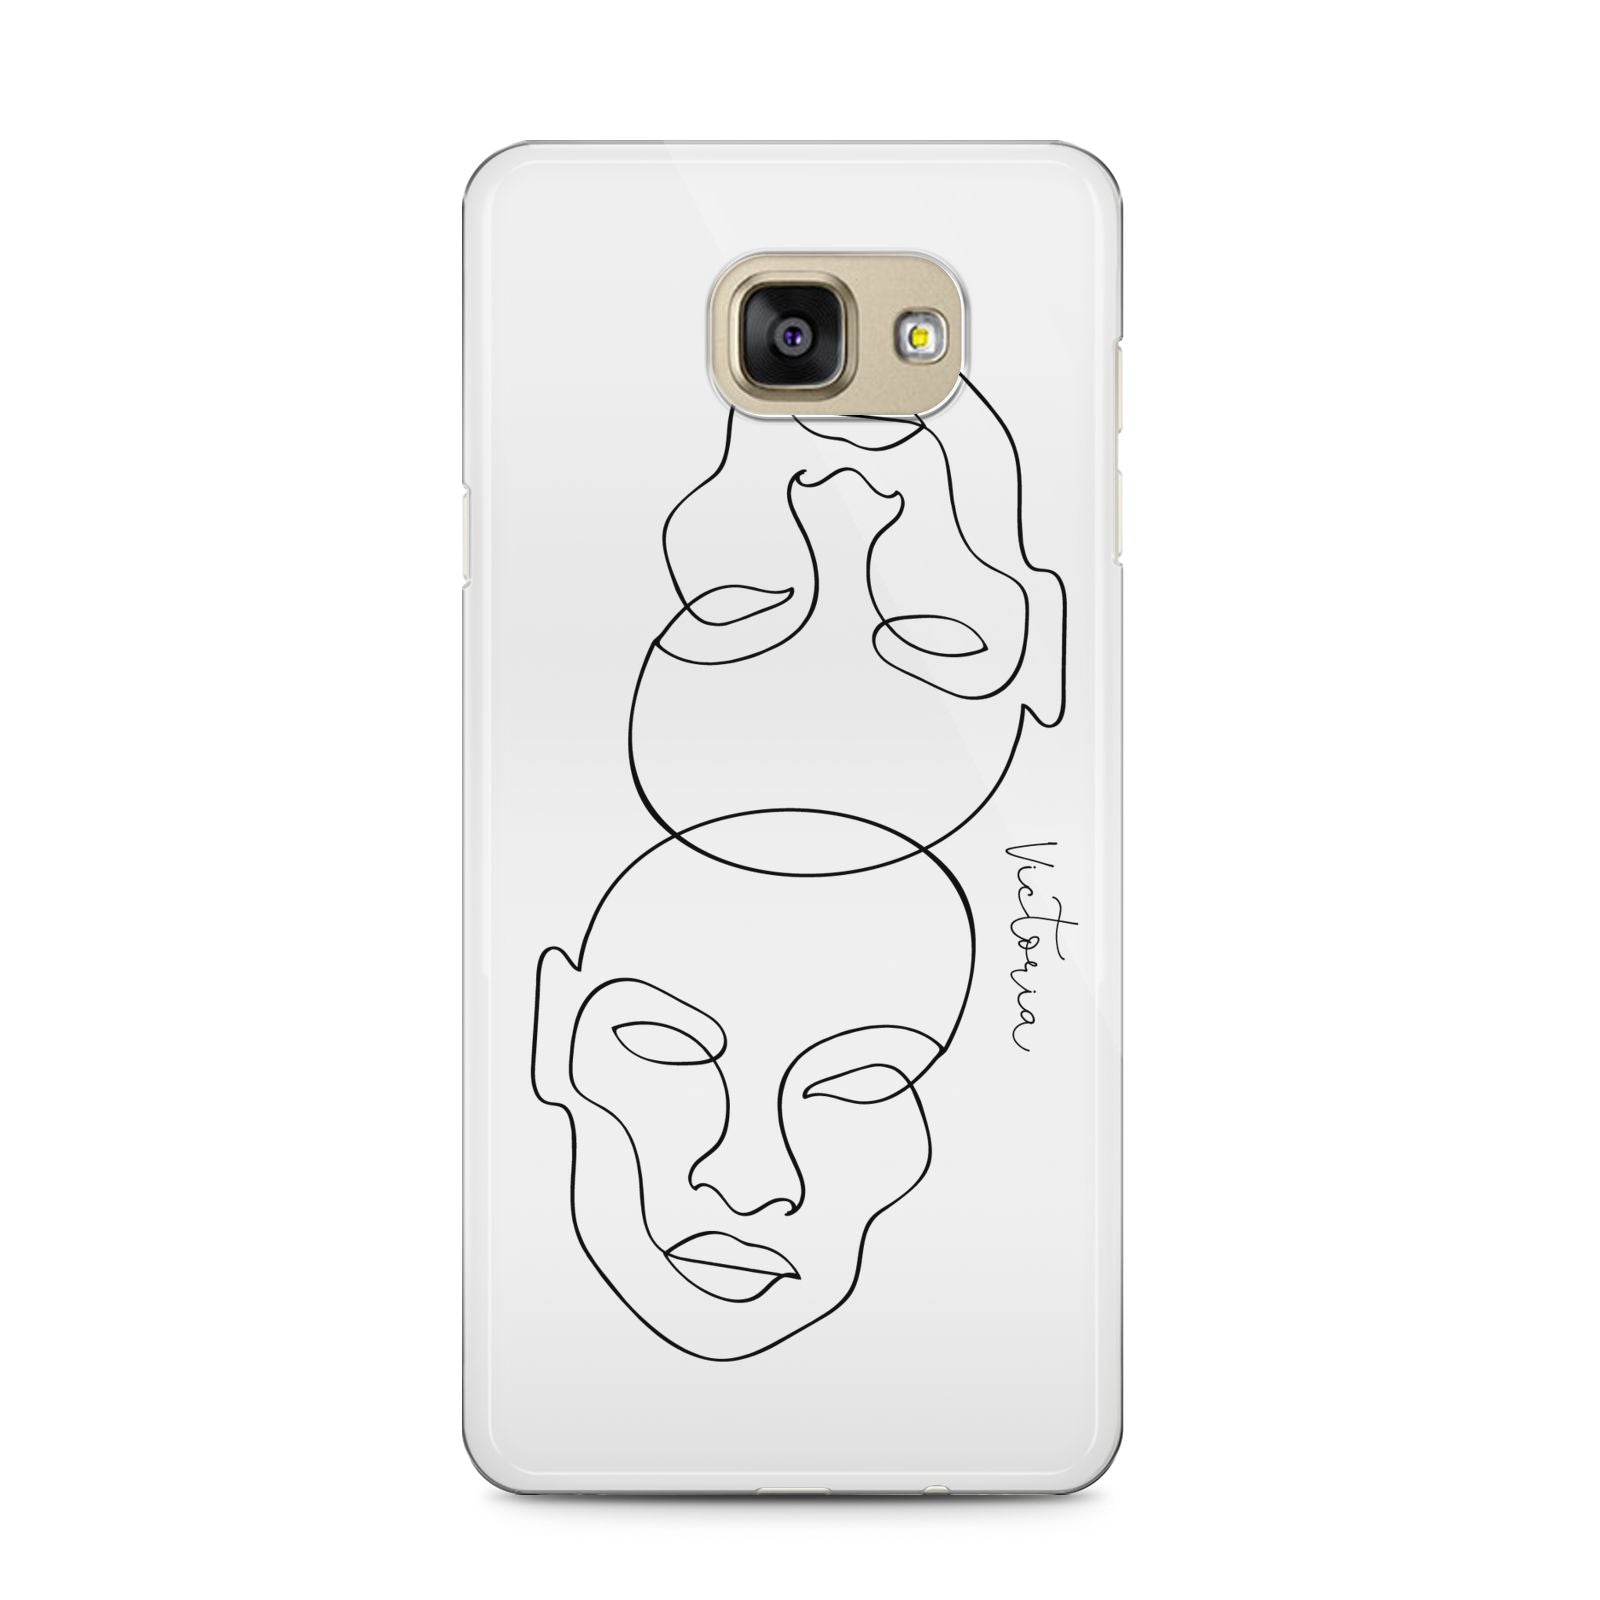 Personalised White Line Art Samsung Galaxy A5 2016 Case on gold phone